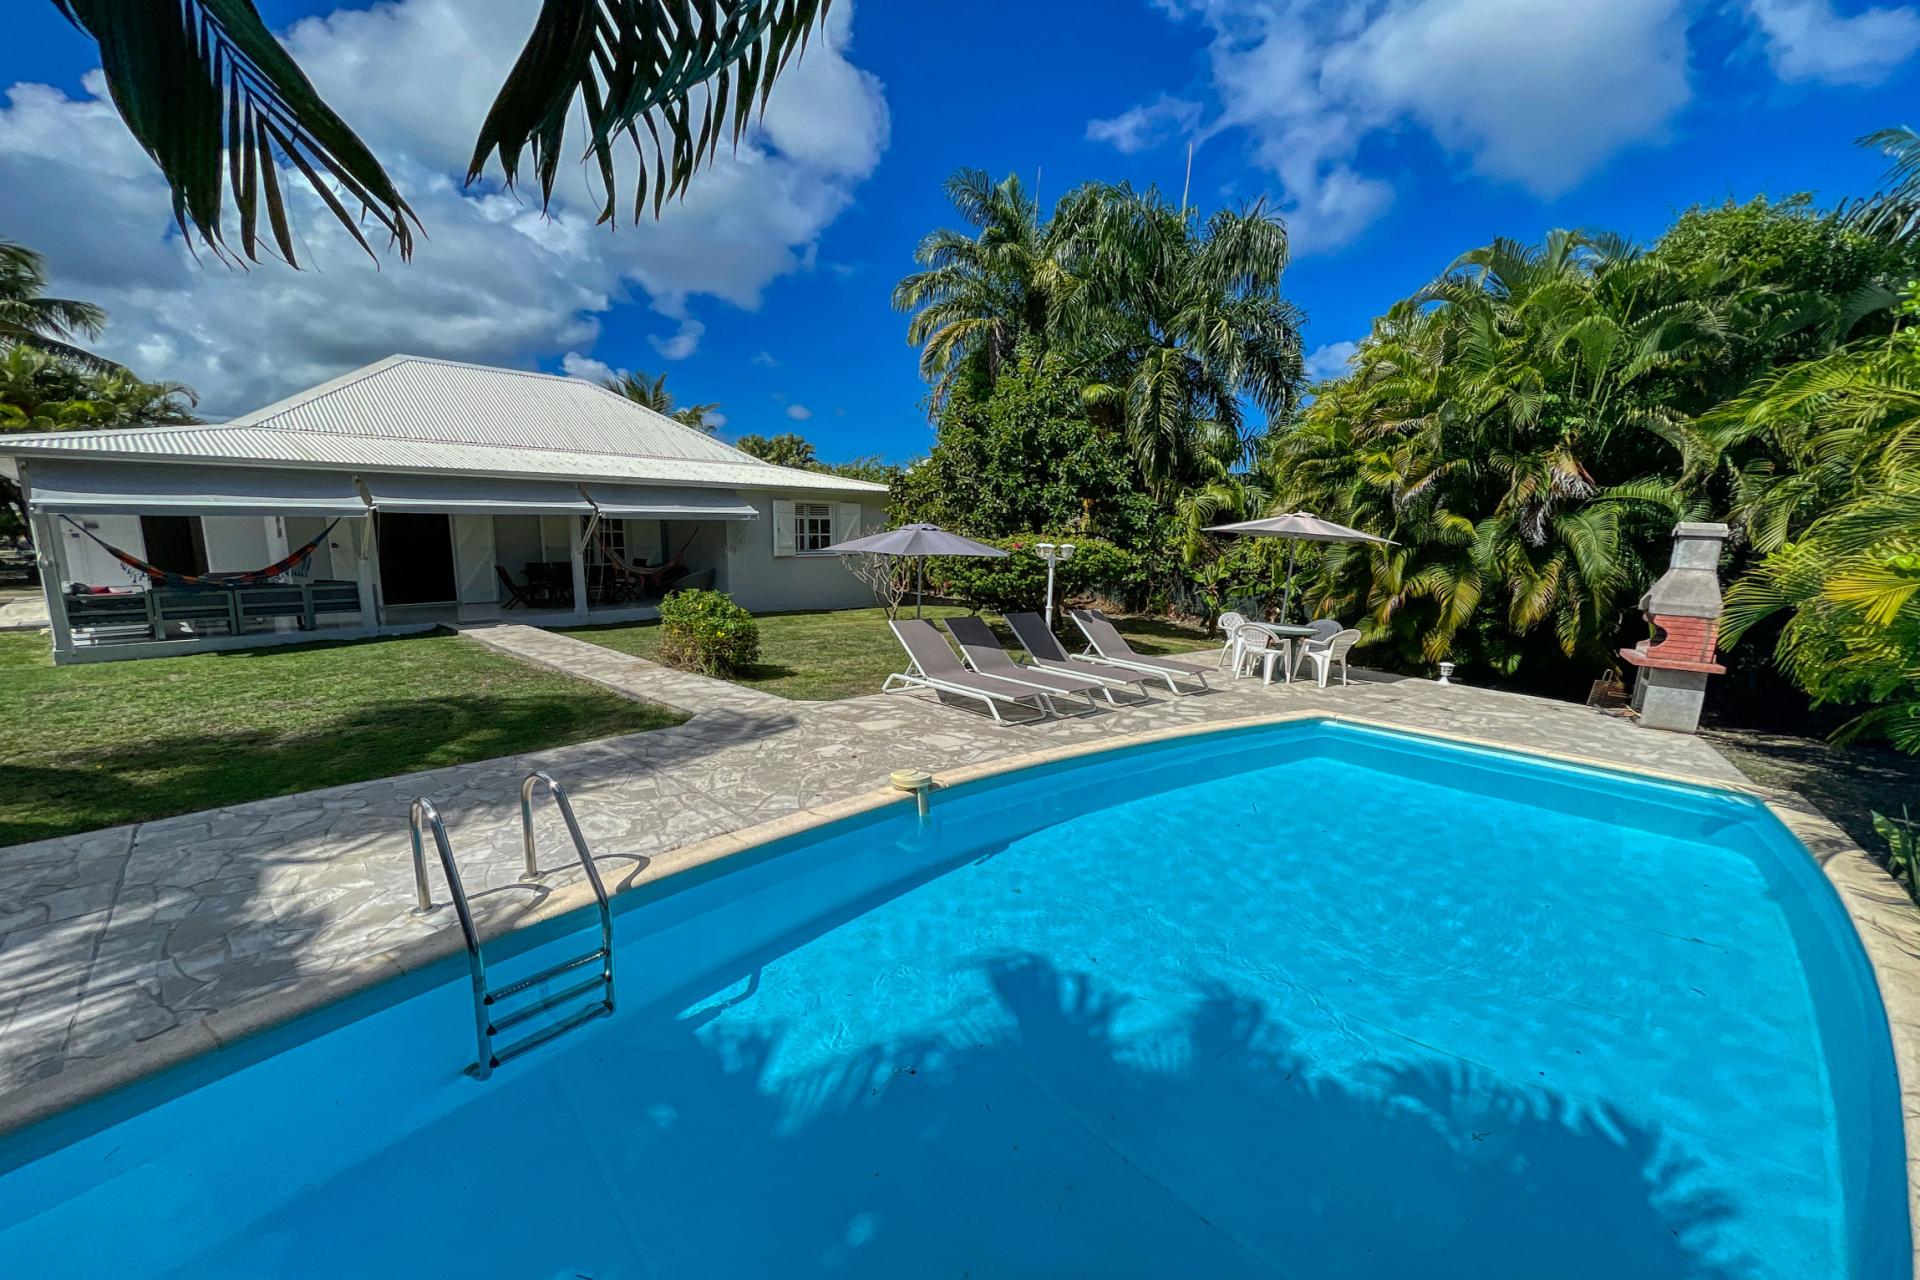 Rental villa Guadeloupe - overview